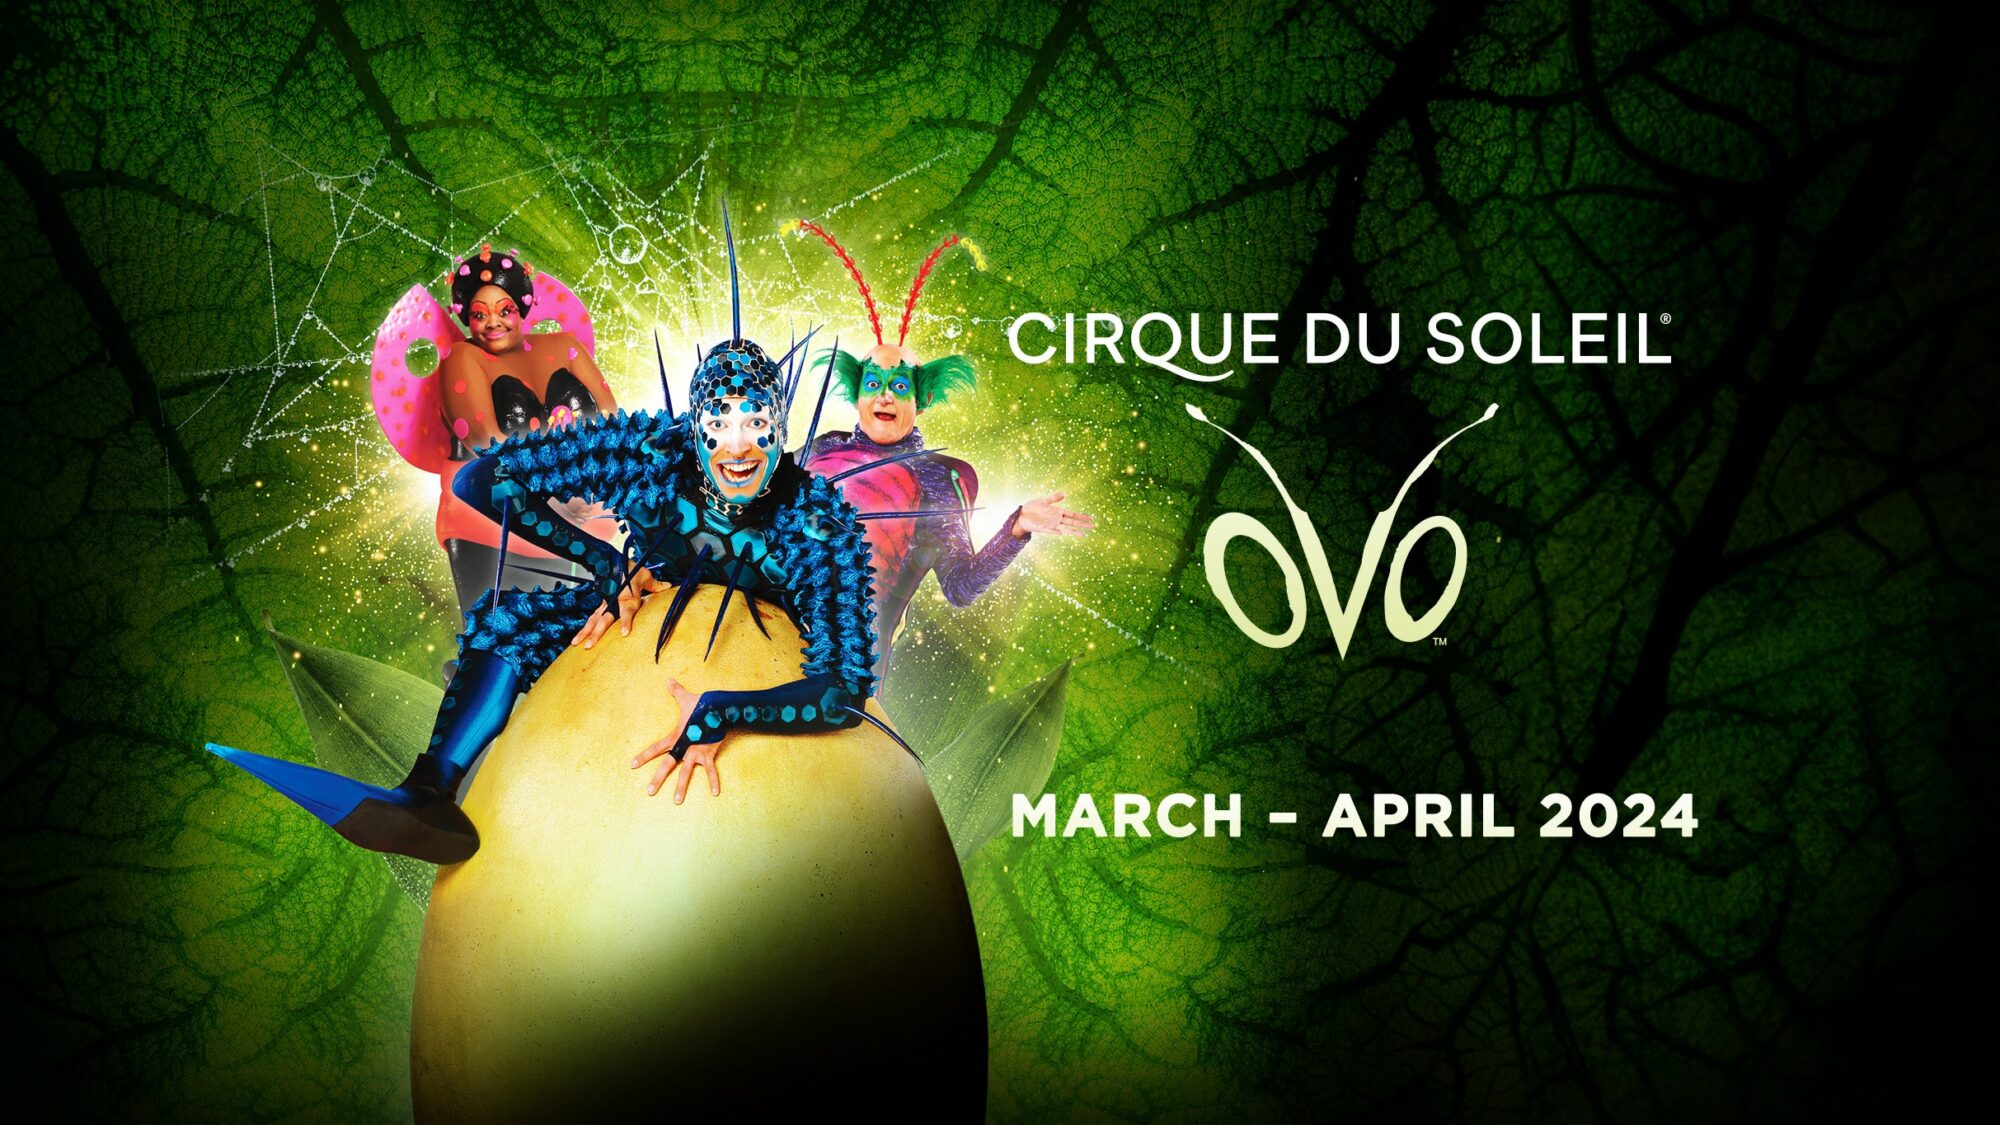 Image name Cirque Du Soleil Ovo at First Direct Arena Leeds the 1 image from the post Cirque du Soleil : OVO - Meet & Greet Package at First Direct Arena, Leeds in Yorkshire.com.